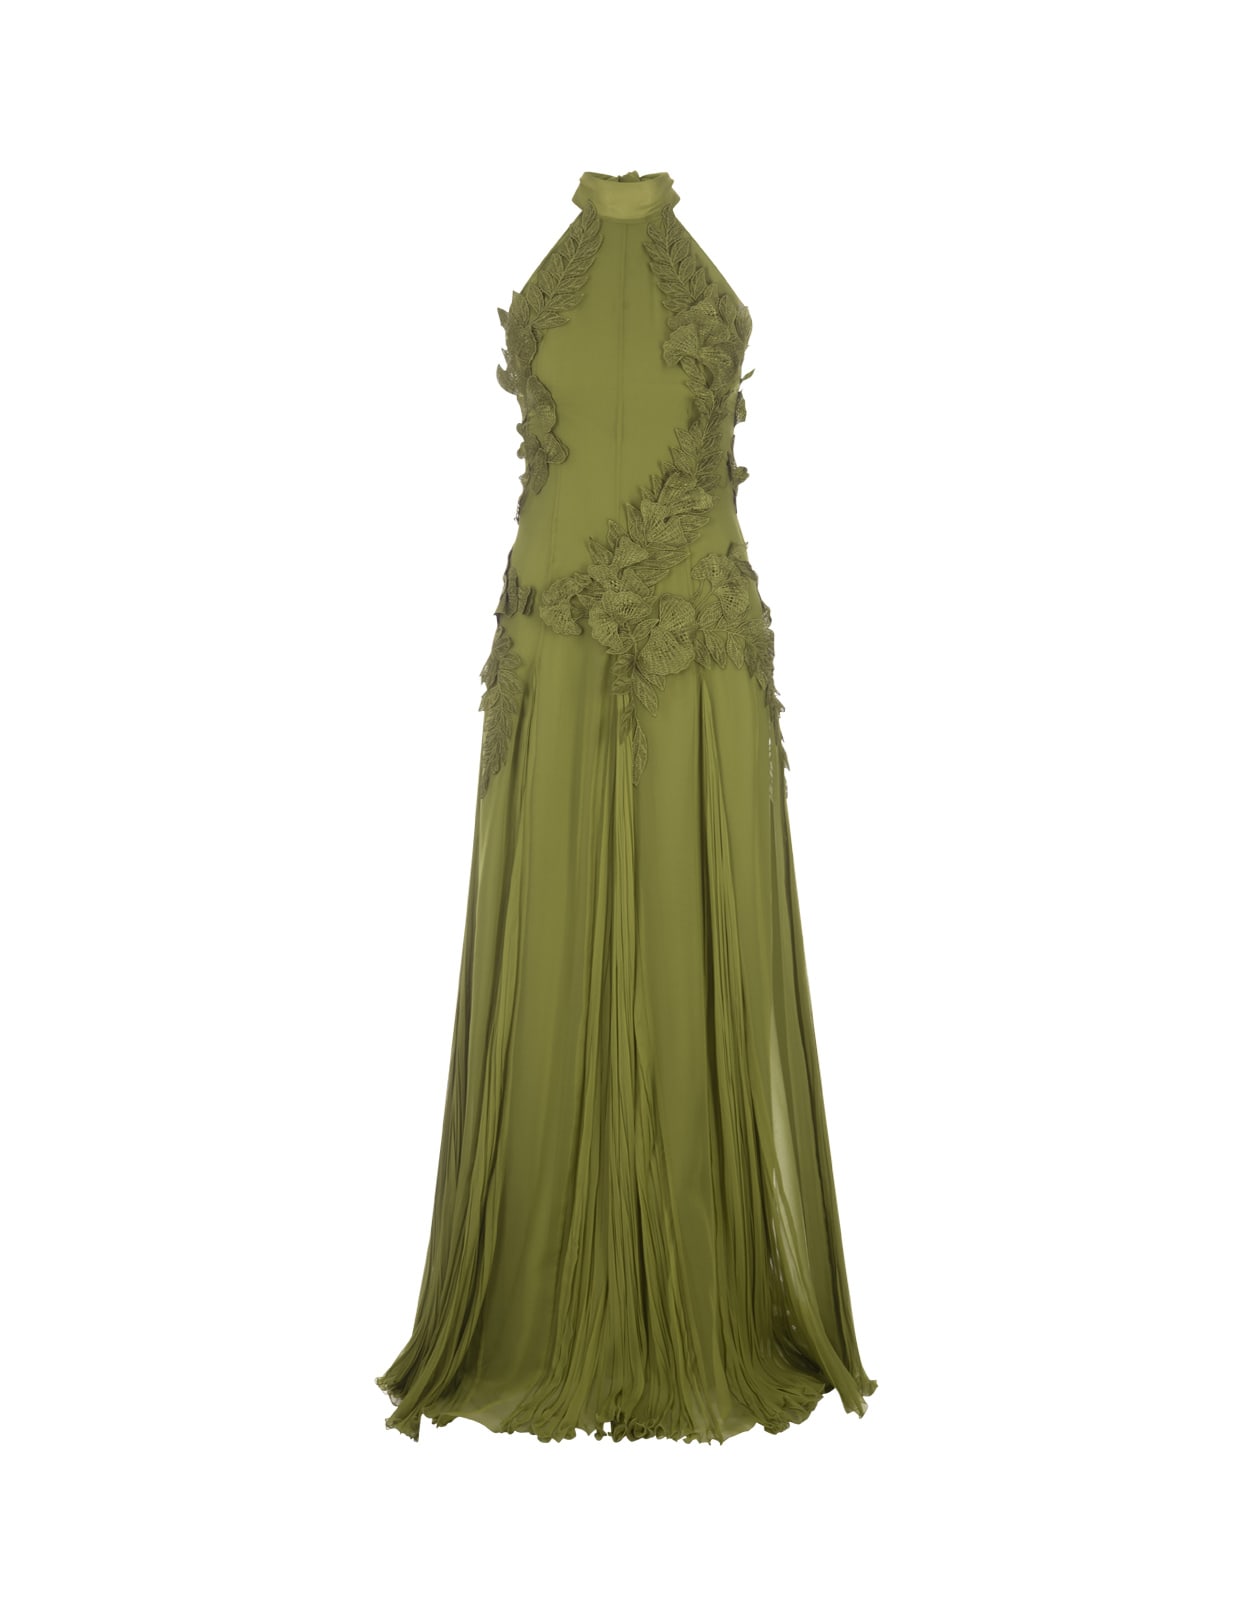 Alberta Ferretti Long Green Chiffon Dress With Flowers And Remage Embroidery